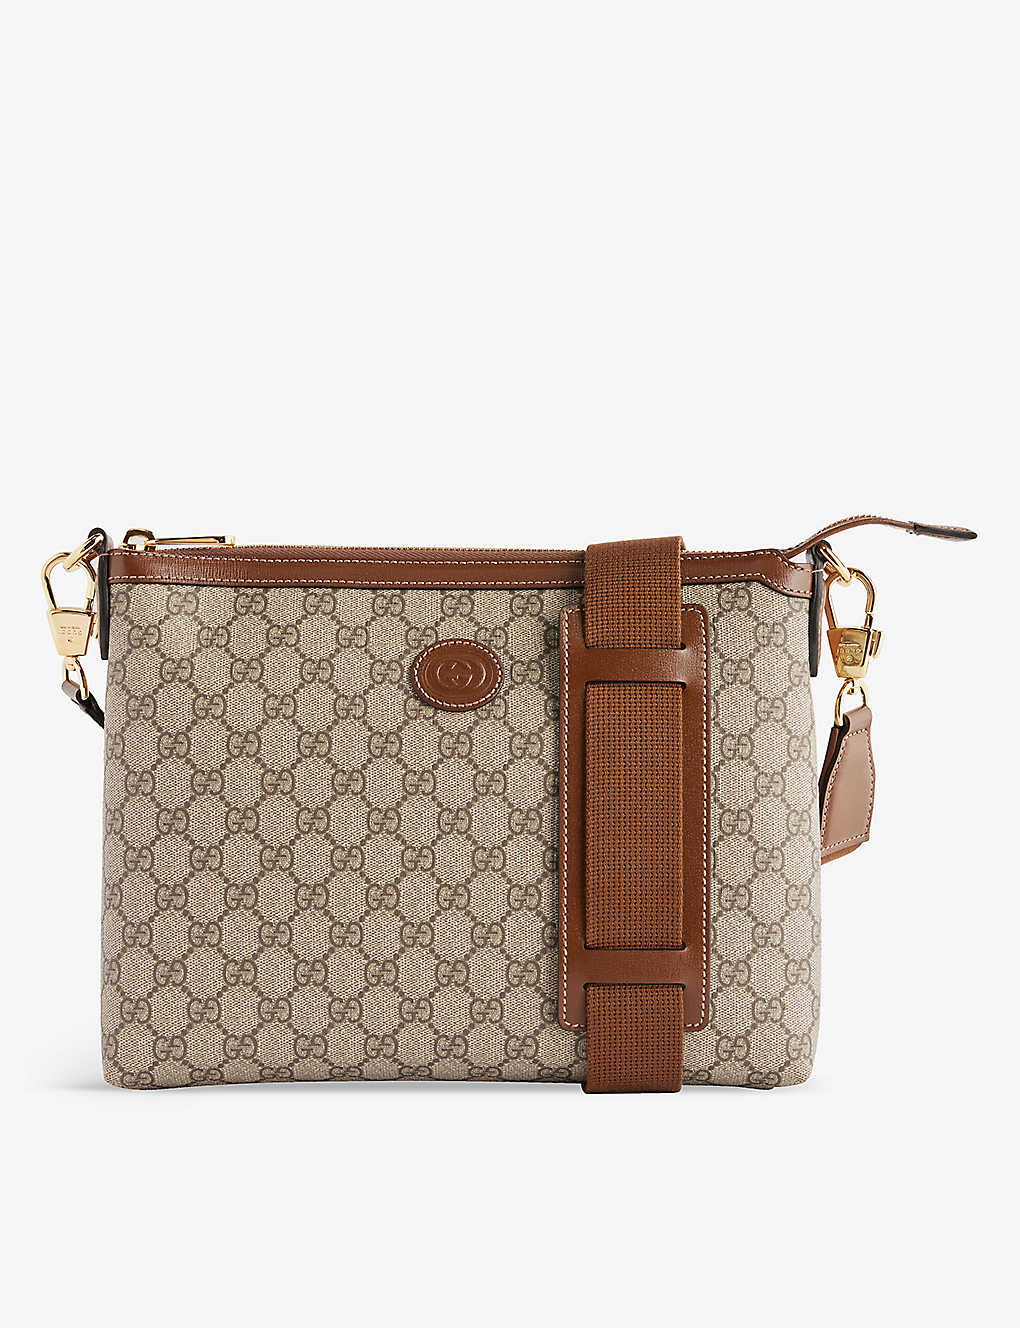 Gucci Ophidia Gg Canvas Cross-body Messenger Bag In Be.eb/bro.sug/br.sug